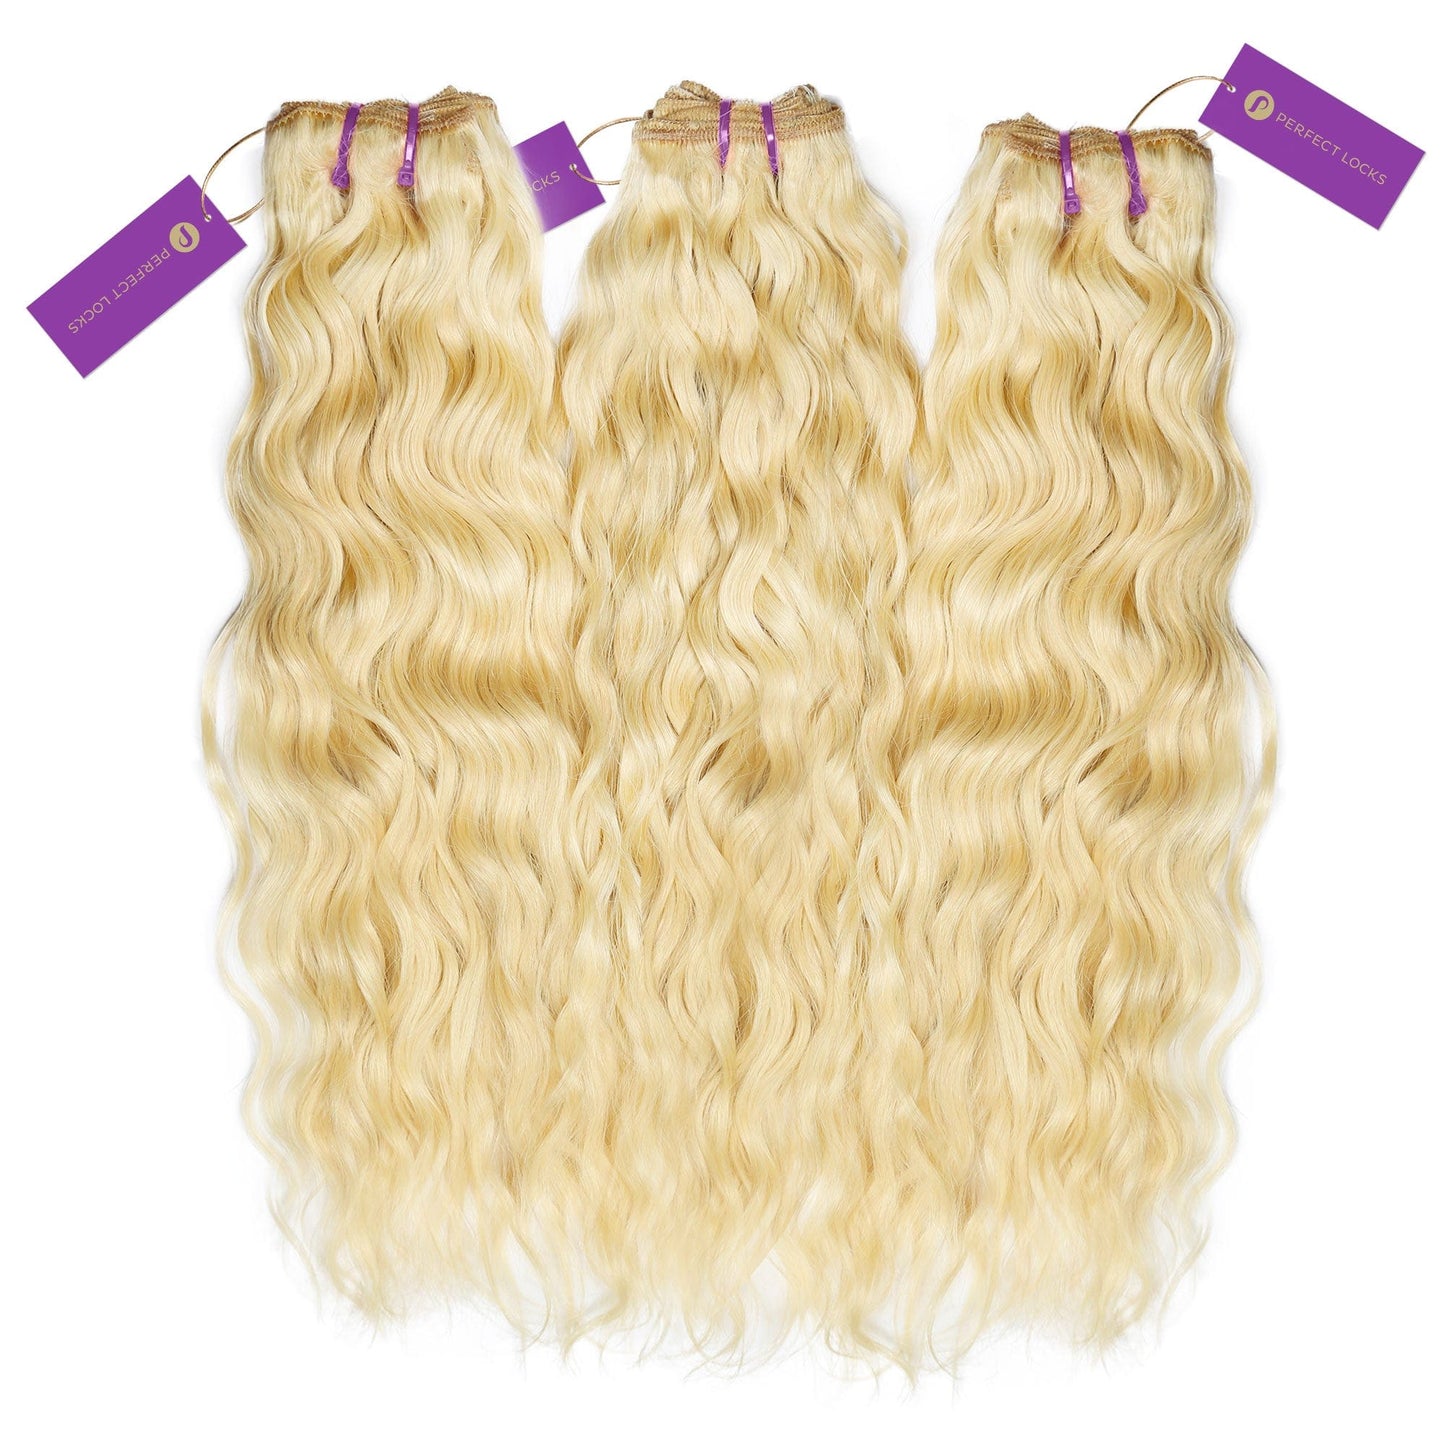 3 x Curly Colored Machine Weft Bundle Deal